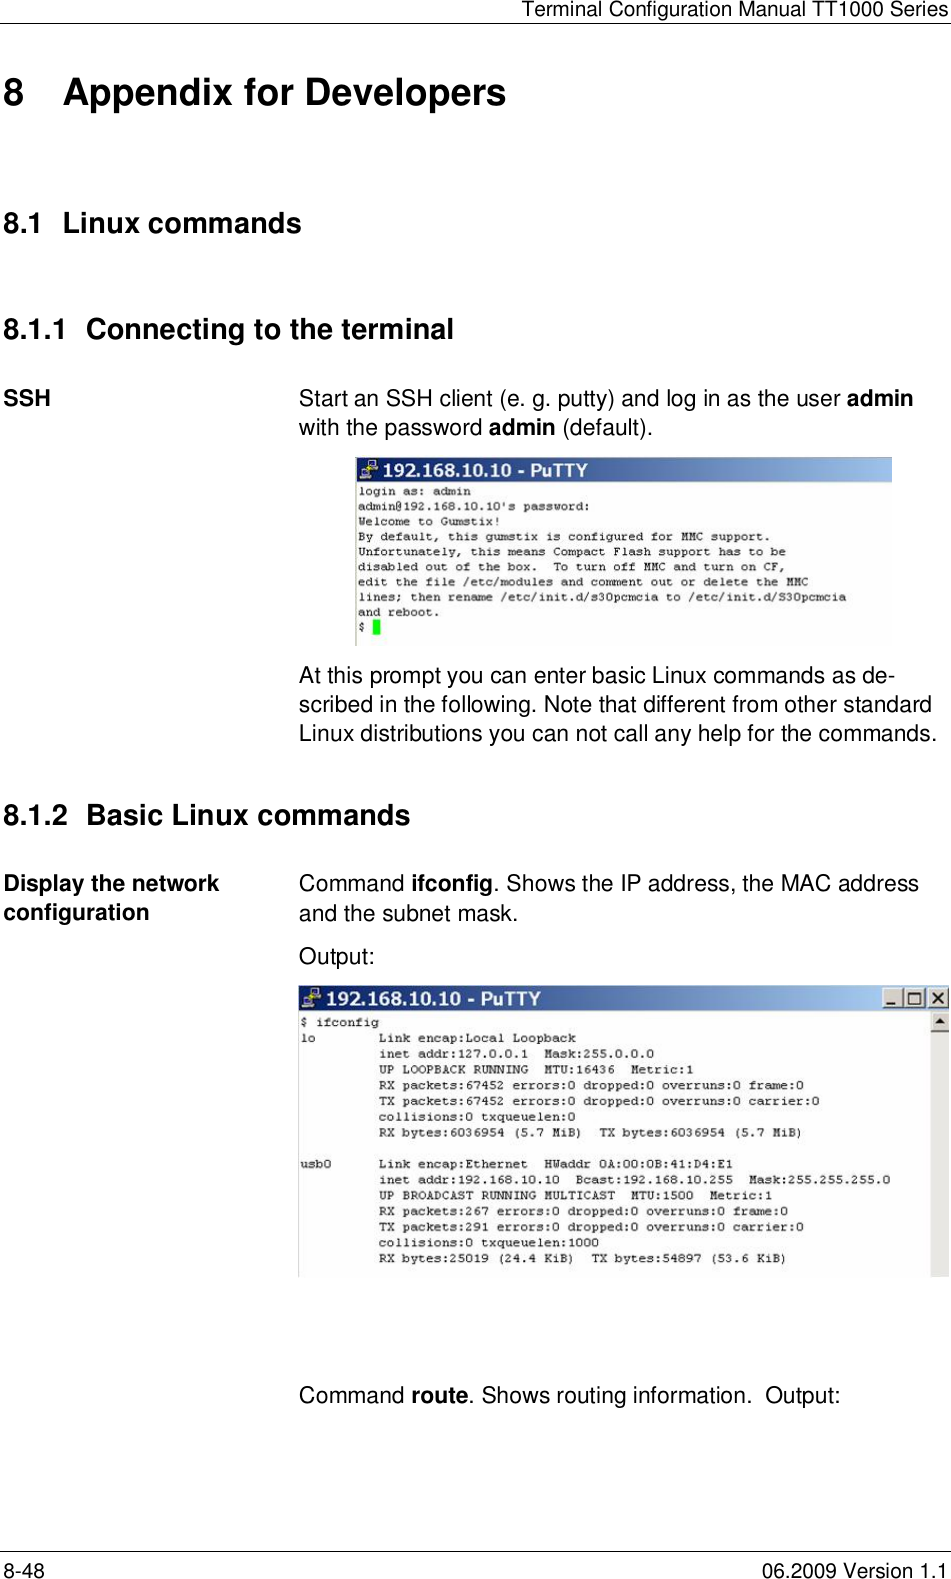 Terminal Configuration Manual TT1000 Series8-48 06.2009 Version 1.18  Appendix for Developers8.1  Linux commands8.1.1  Connecting to the terminalSSH Start an SSH client (e. g. putty) and log in as the user adminwith the password admin (default).At this prompt you can enter basic Linux commands as de-scribed in the following. Note that different from other standardLinux distributions you can not call any help for the commands.8.1.2  Basic Linux commandsDisplay the networkconfigurationCommand ifconfig. Shows the IP address, the MAC addressand the subnet mask.Output:Command route. Shows routing information.  Output: